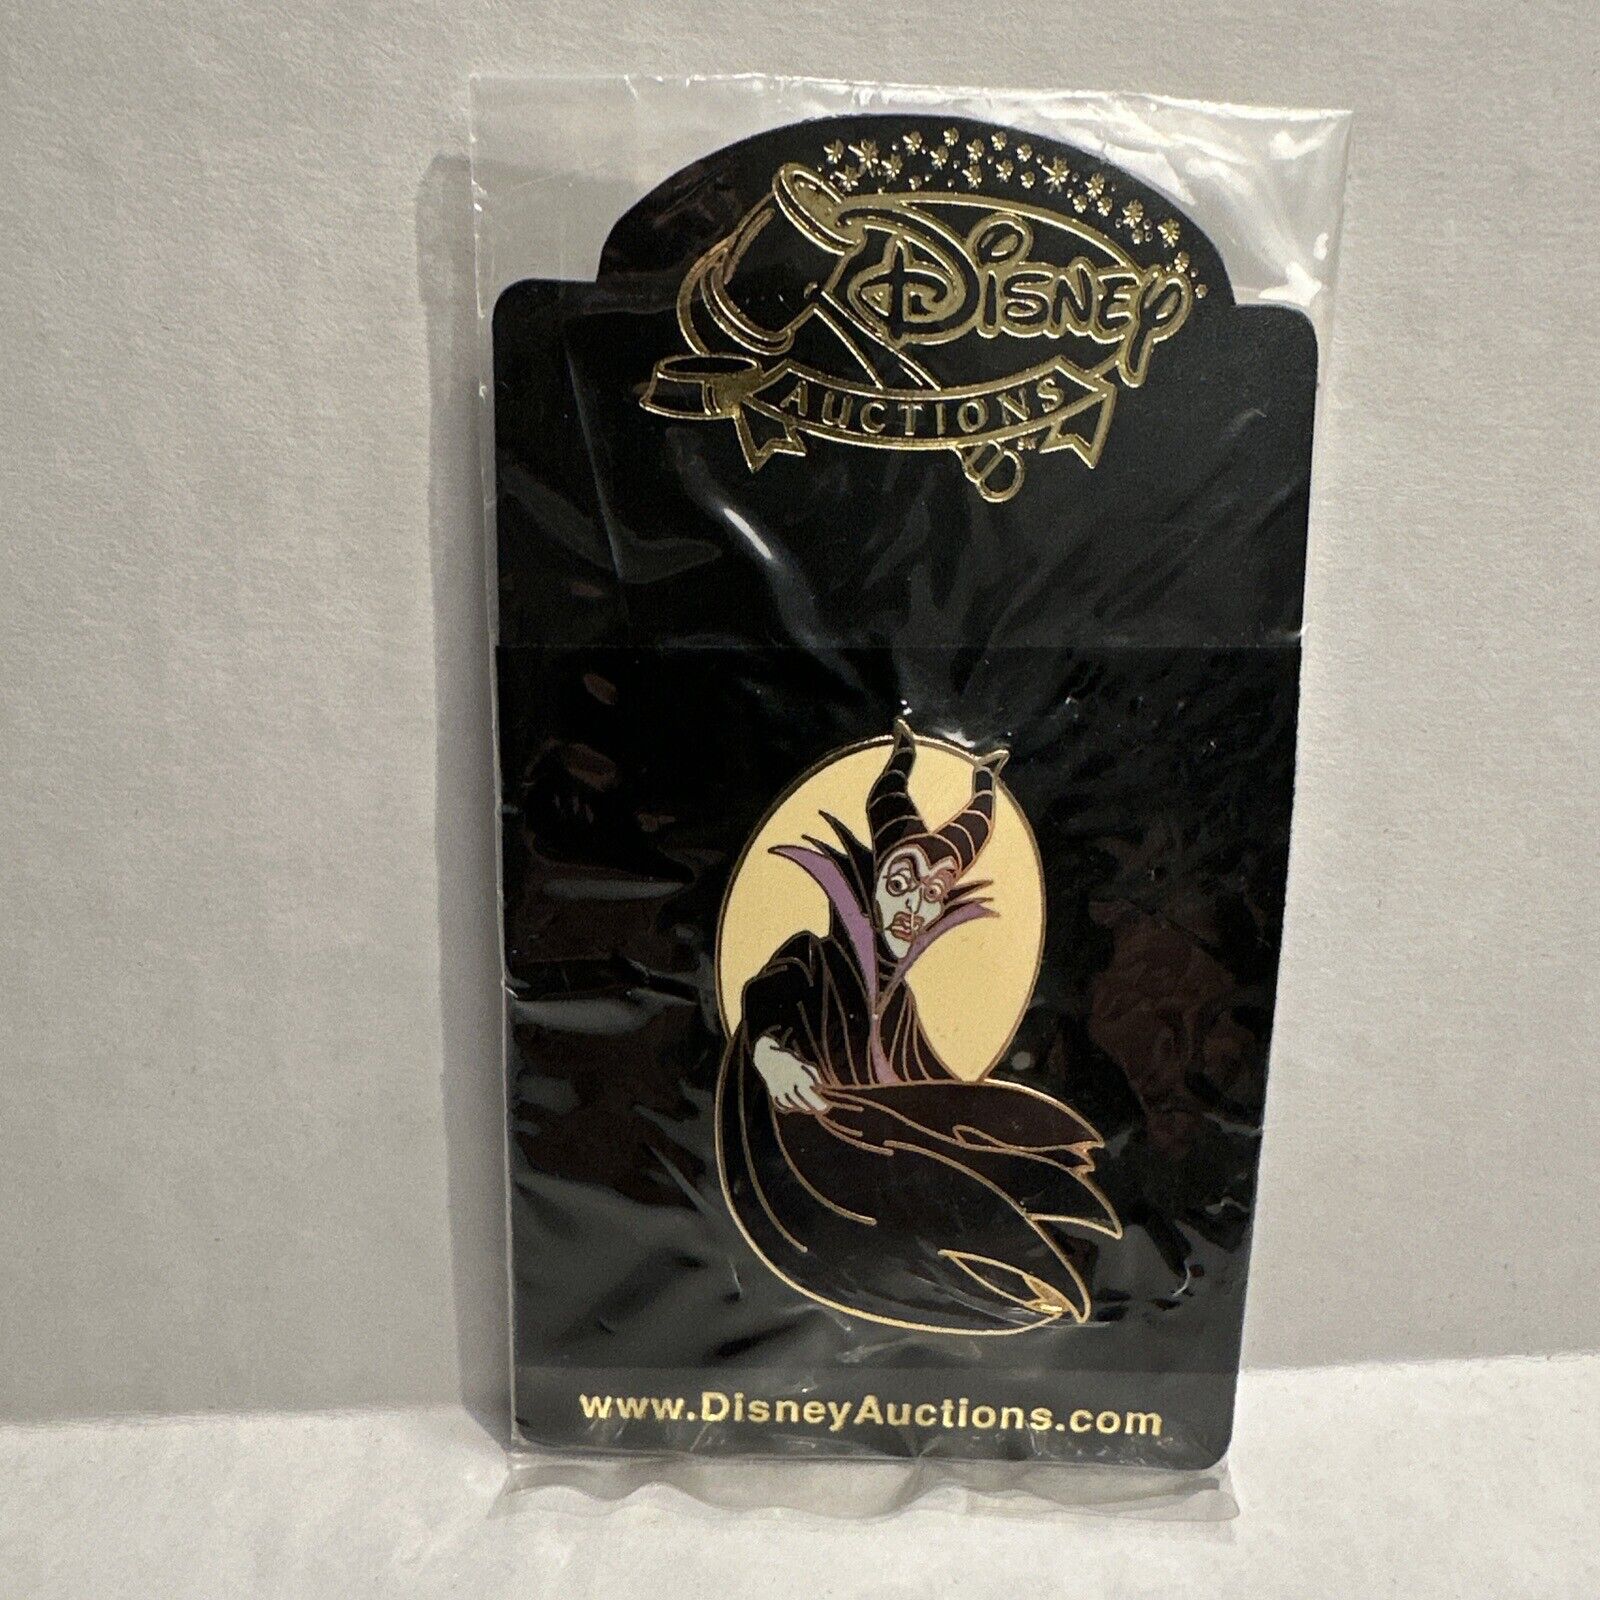 NEW Disney Auctions Maleficent in Cape Pin 27730 LE 1000